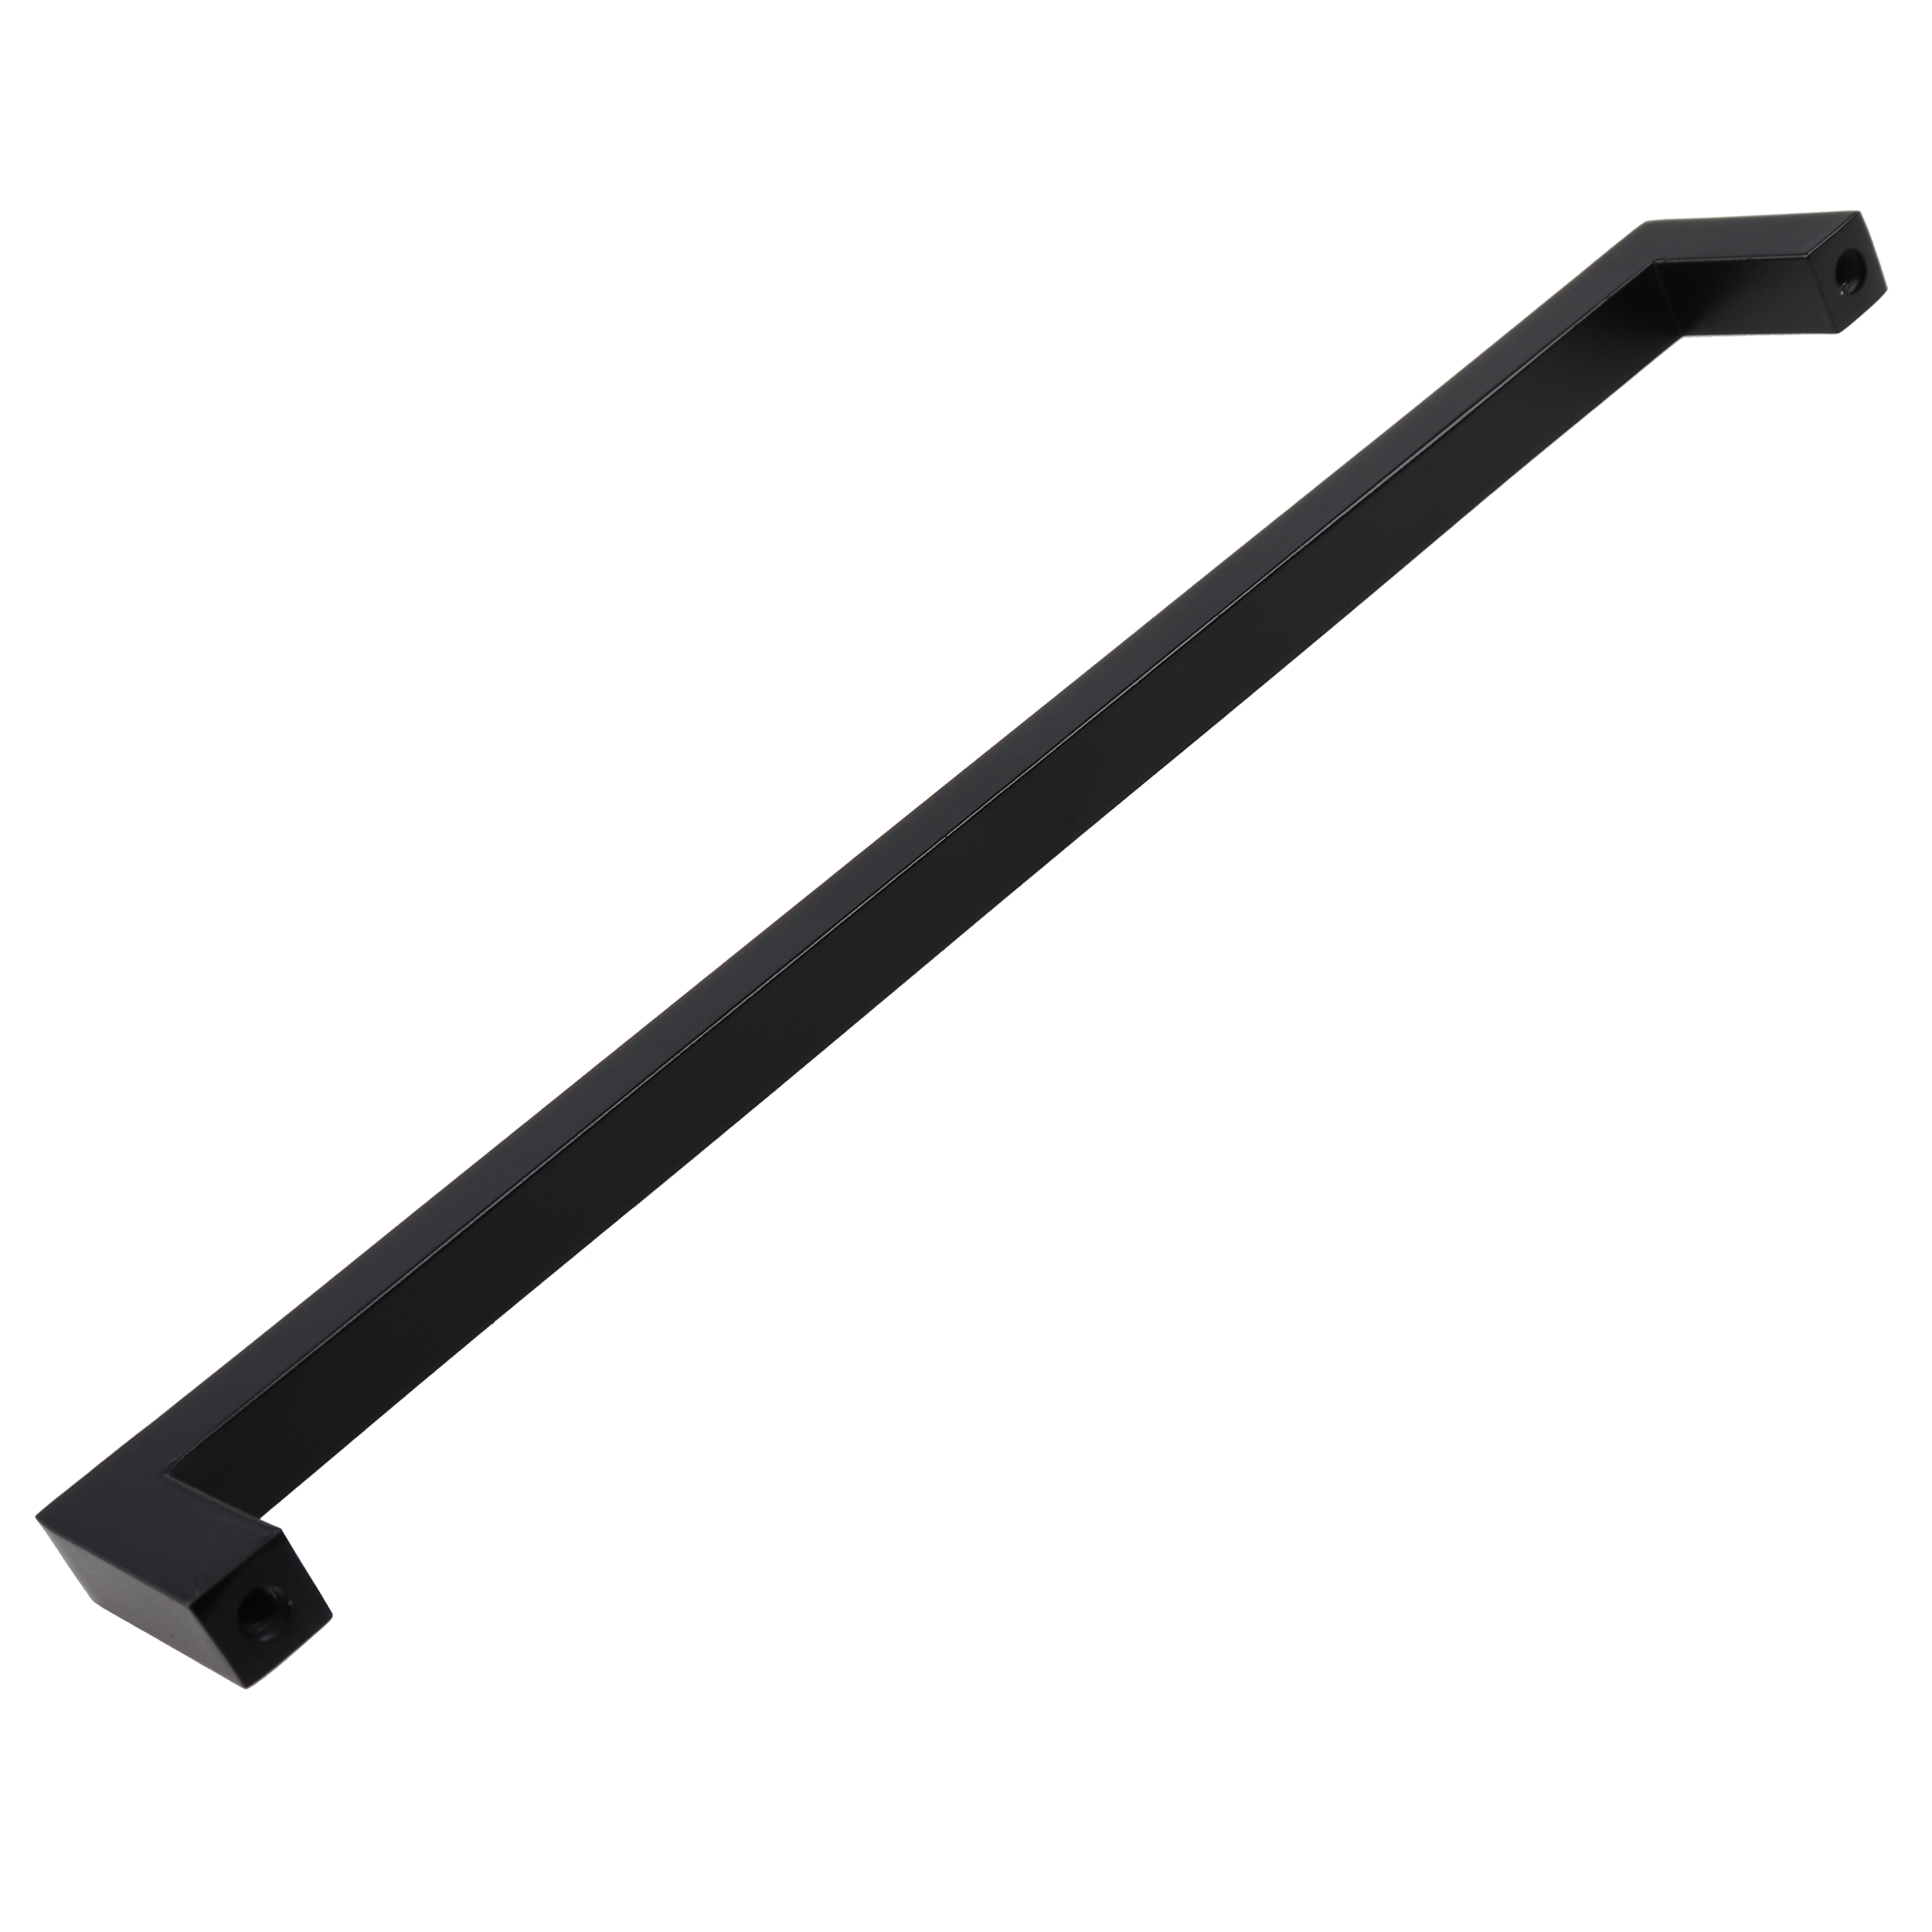 GlideRite 8.75 in. Center Solid Square Bar Cabinet Pulls, Matte Black, Pack of 10 - image 3 of 4